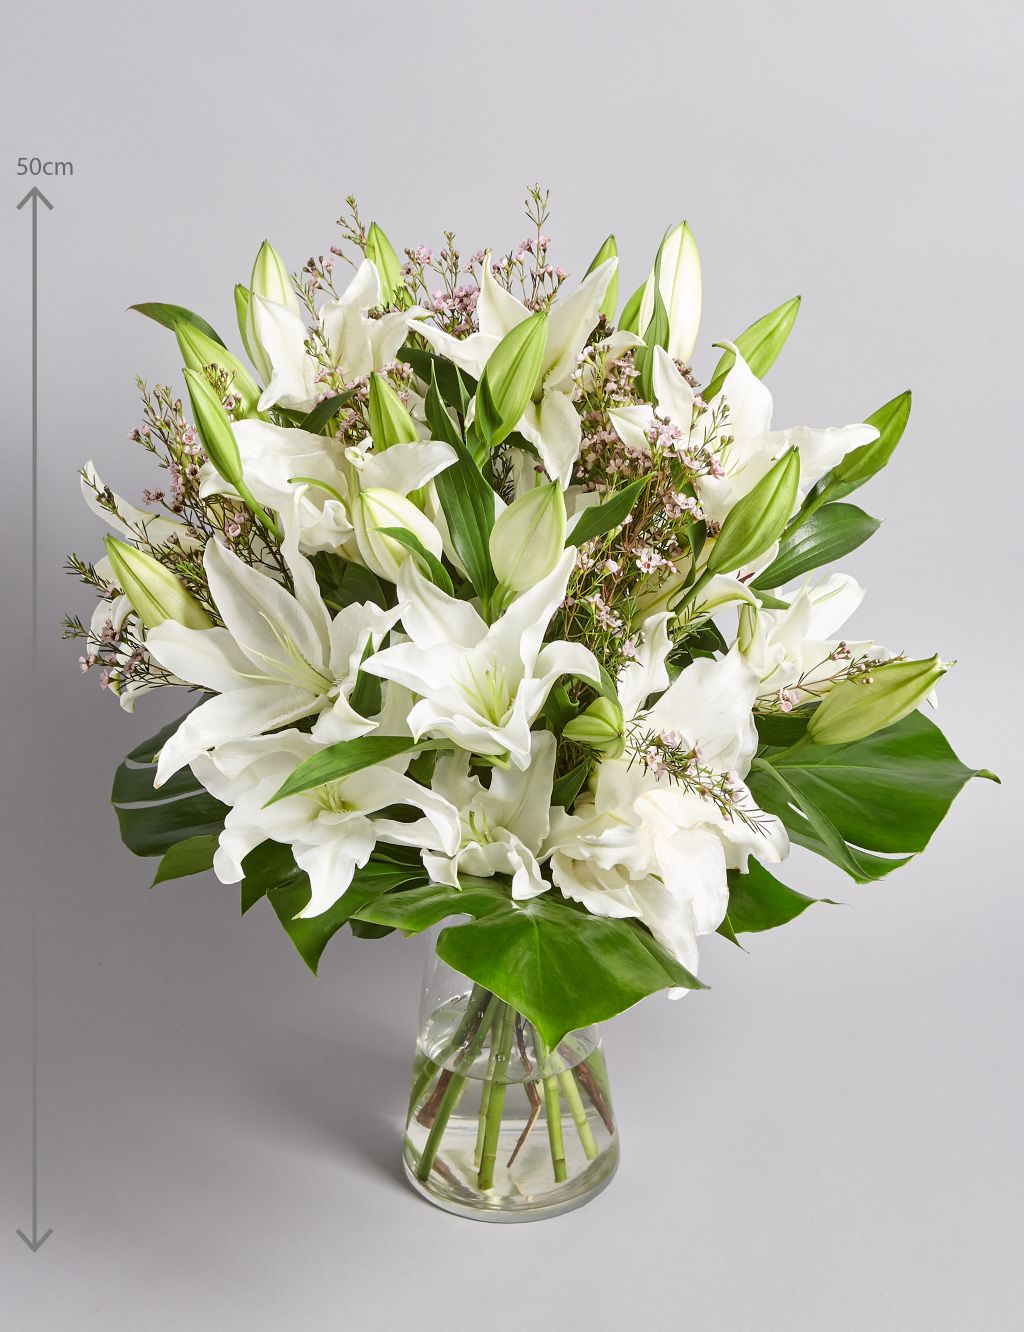 Fairtrade® Lily Bouquet 2 of 7